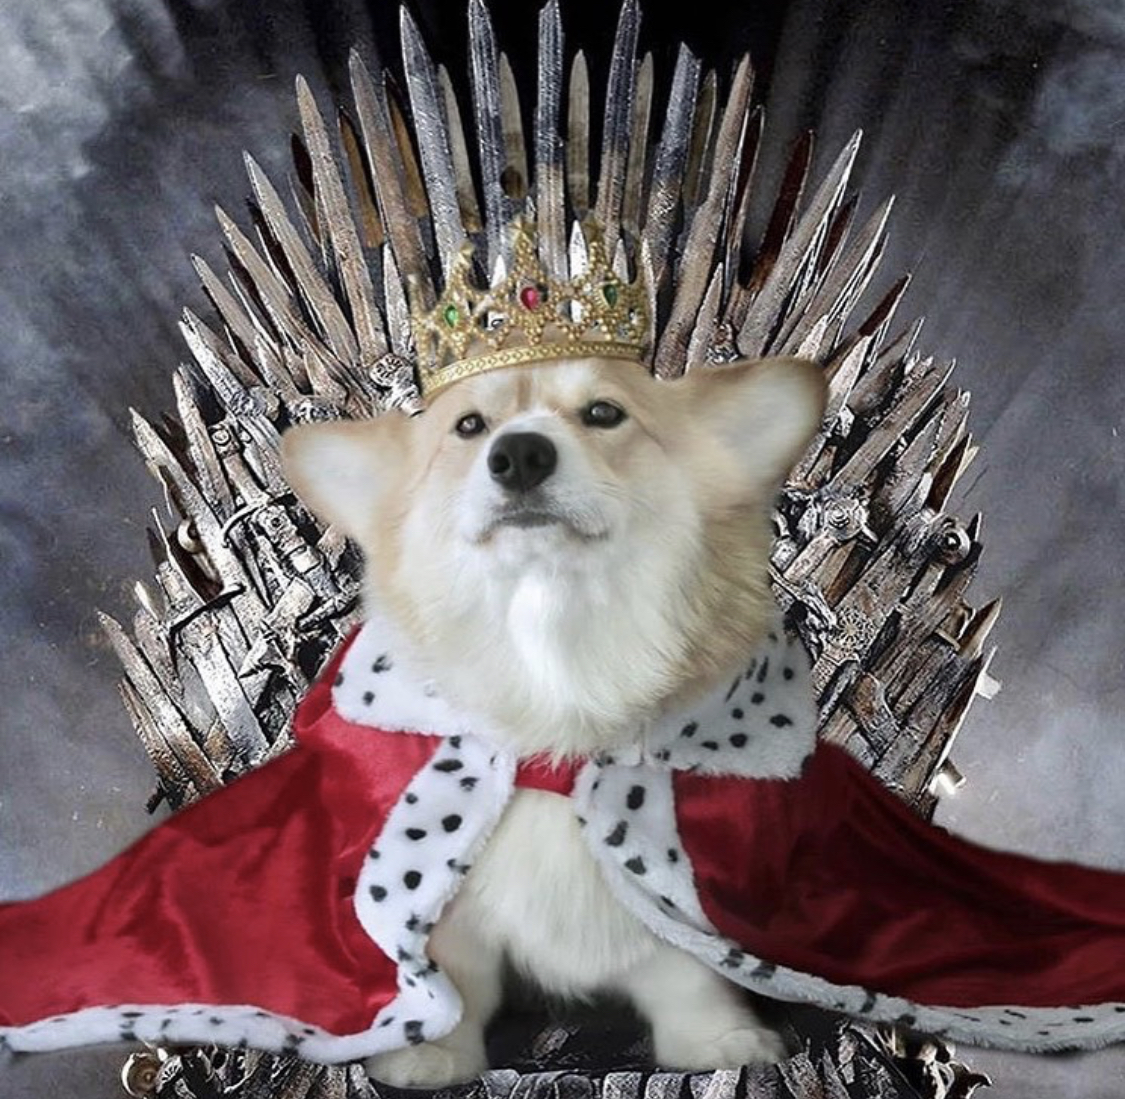 Corgi sitting on a throne wearing a king's outfit